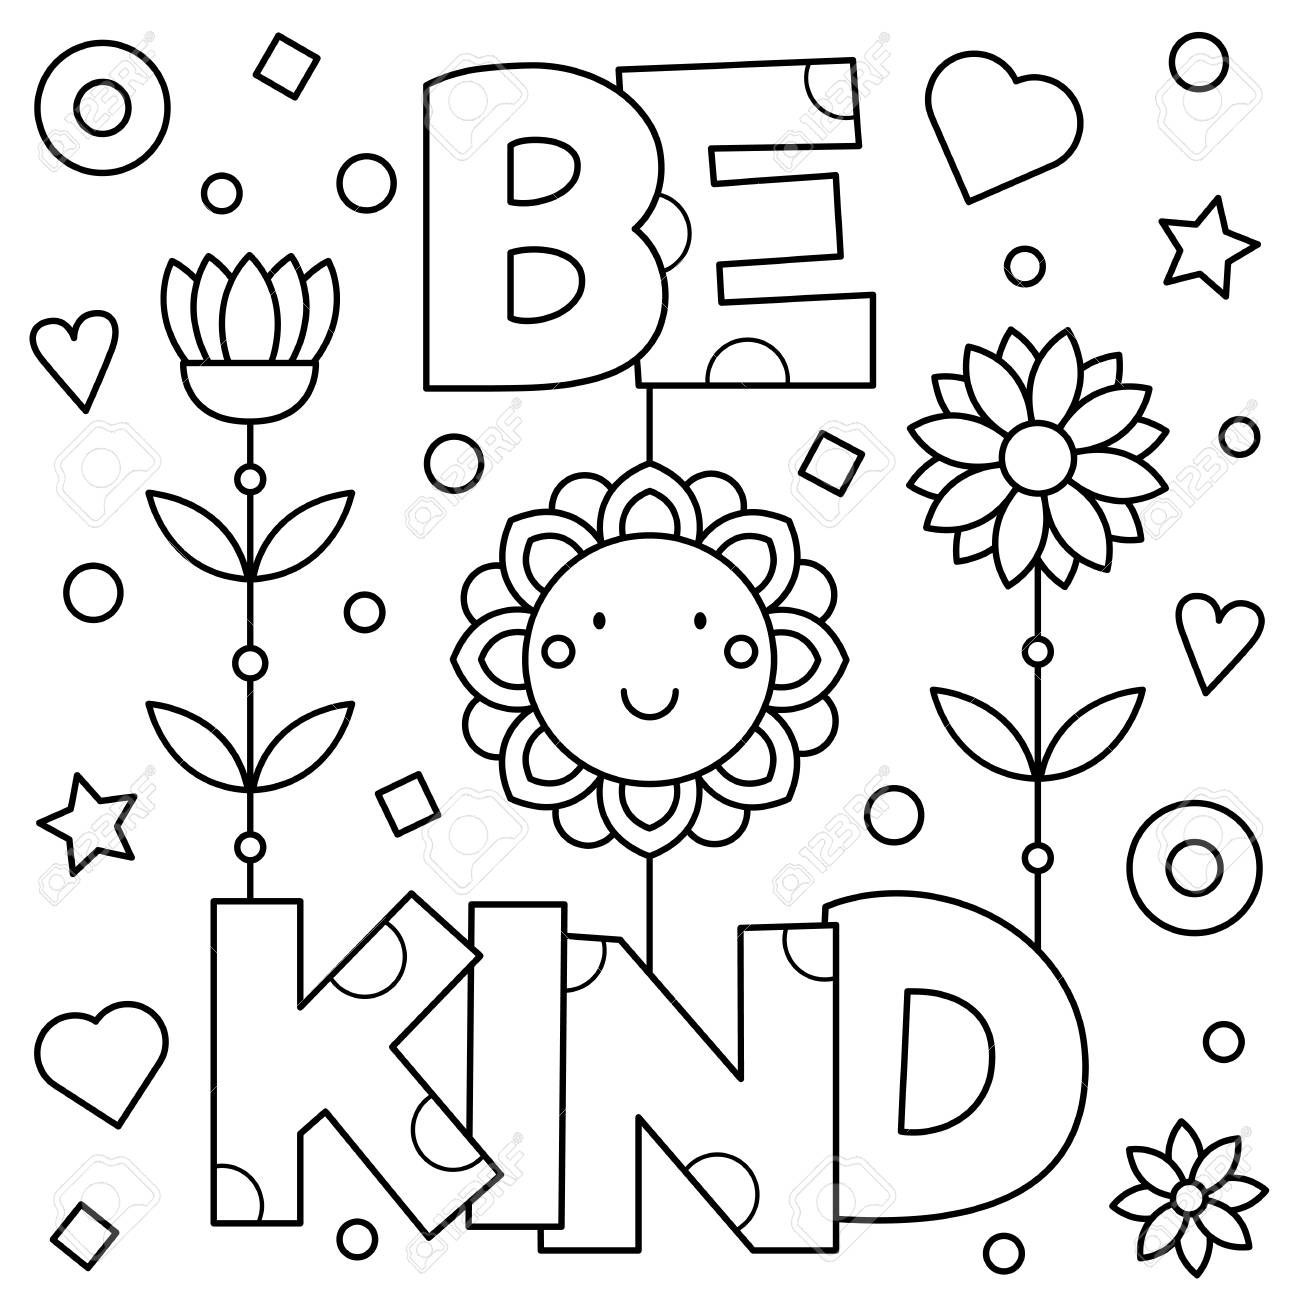 Be Kind Coloring Page   Free Printable Coloring Pages for Kids